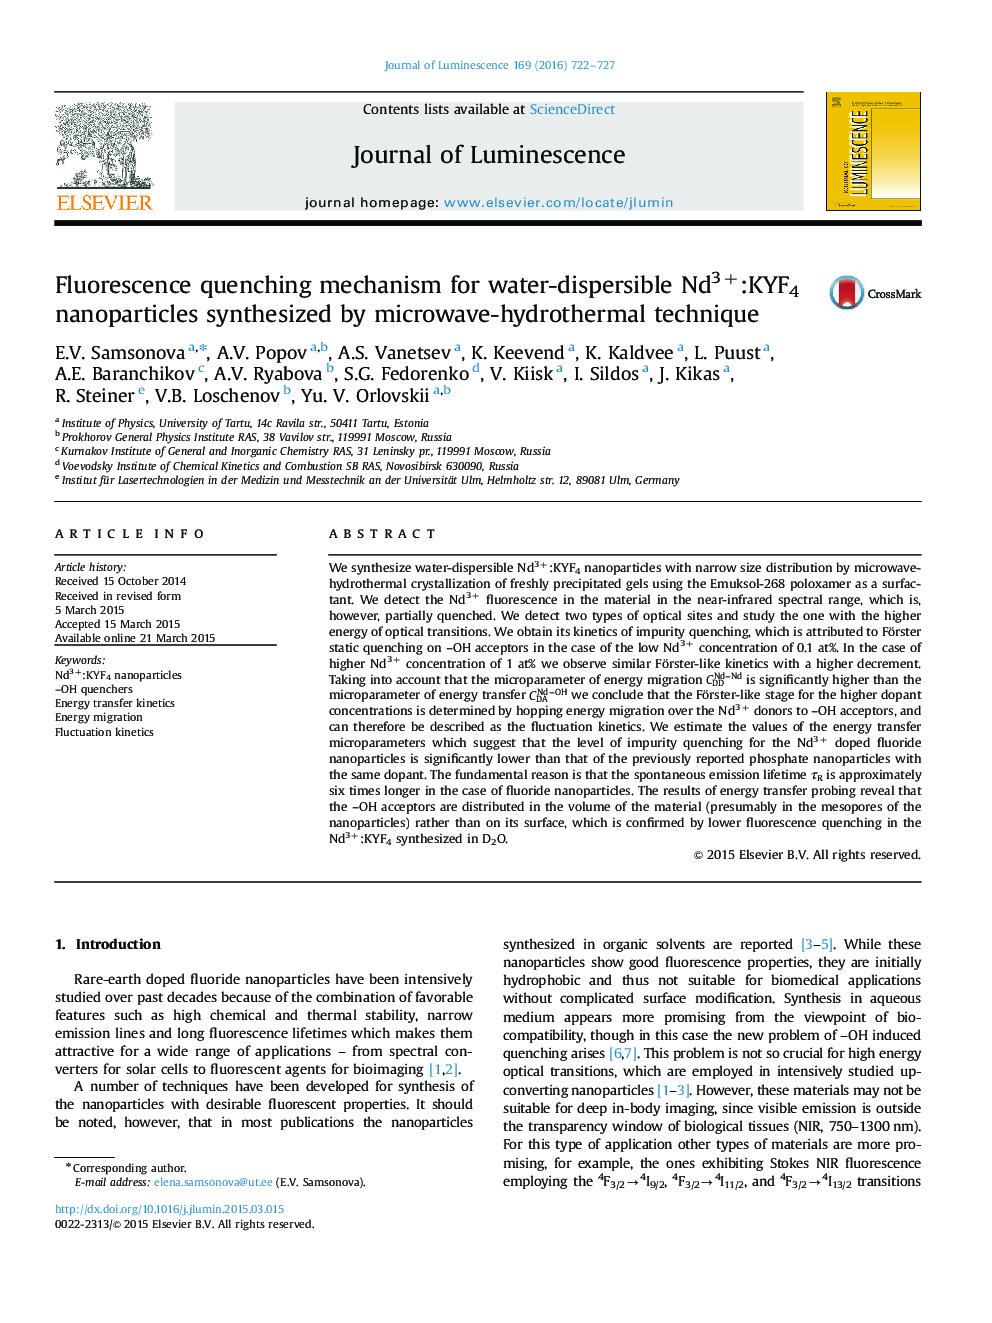 Fluorescence quenching mechanism for water-dispersible Nd3+:KYF4 nanoparticles synthesized by microwave-hydrothermal technique